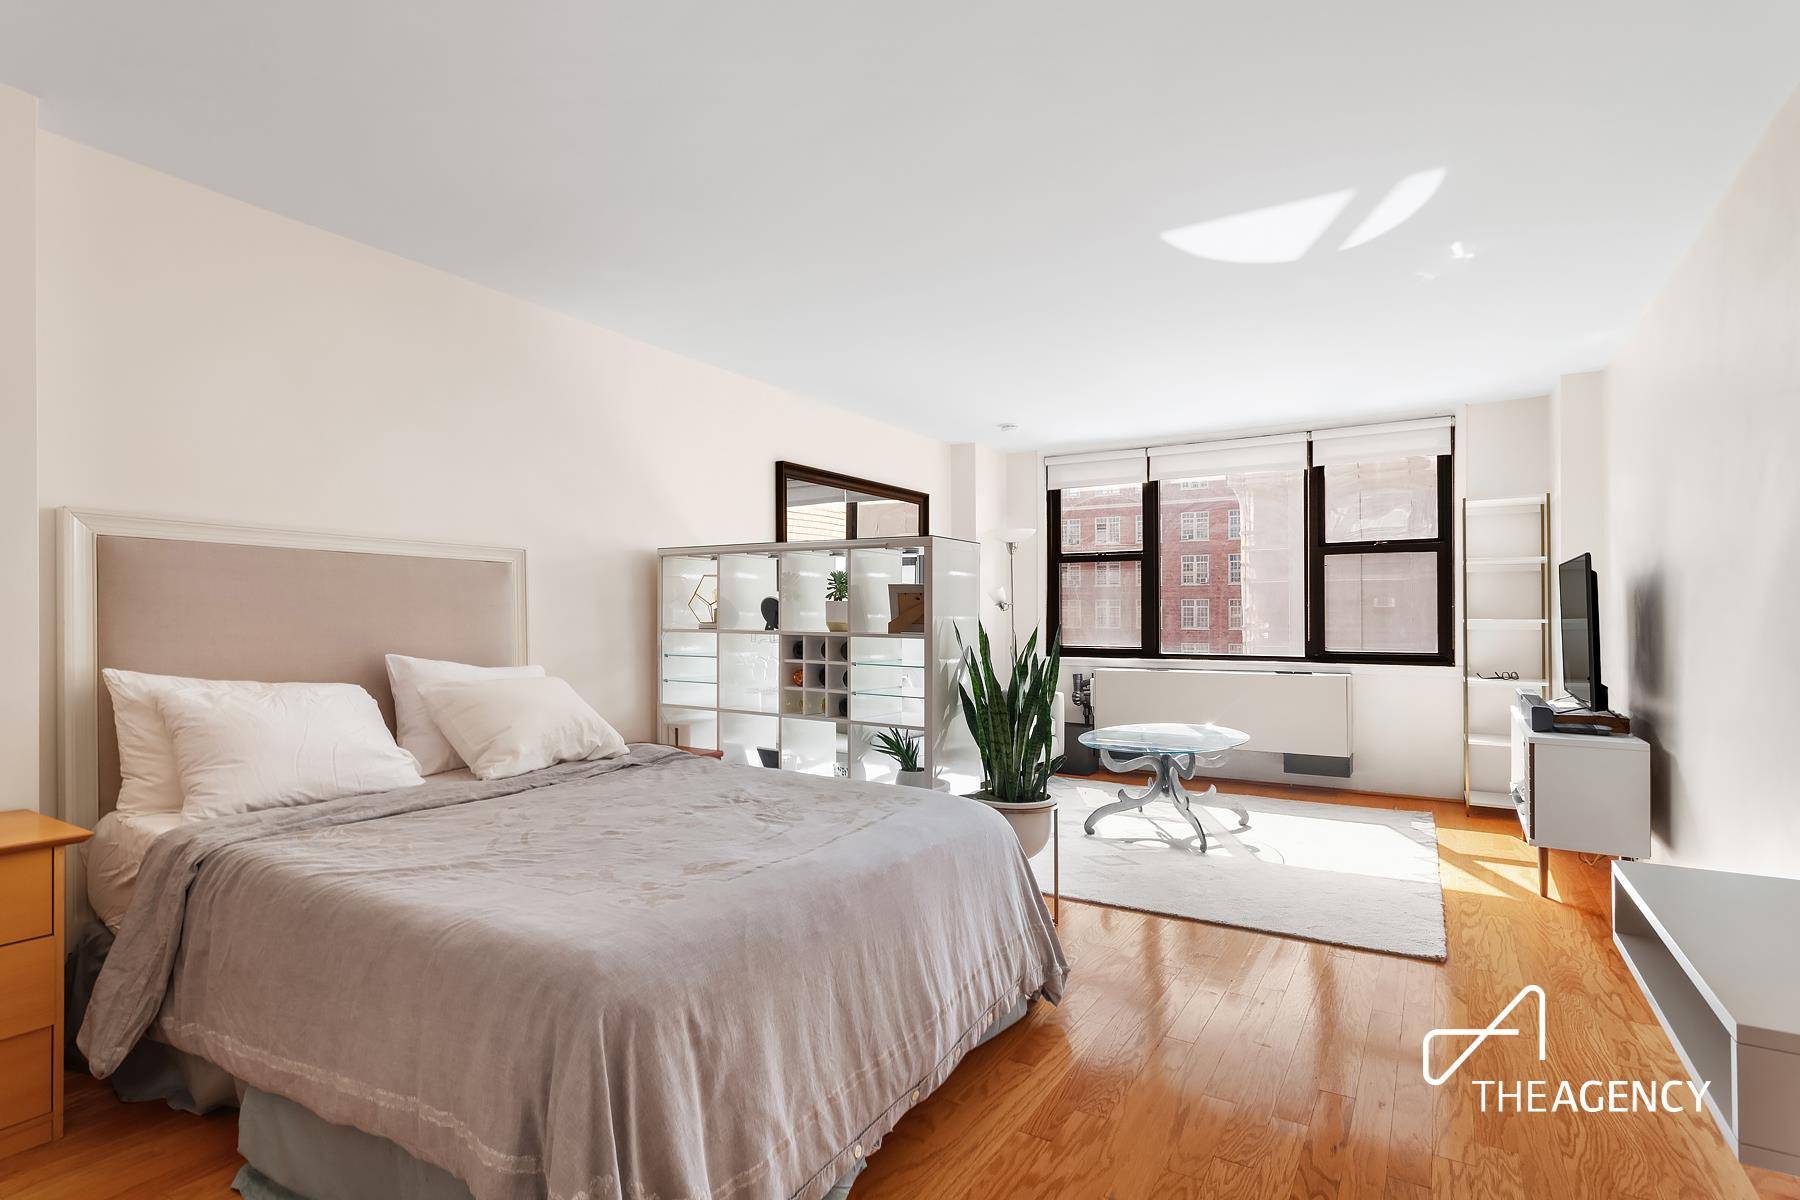 Welcome home to your bright, south facing studio with INCREDIBLY LOW MAINTENANCE in the best part of Gramercy.